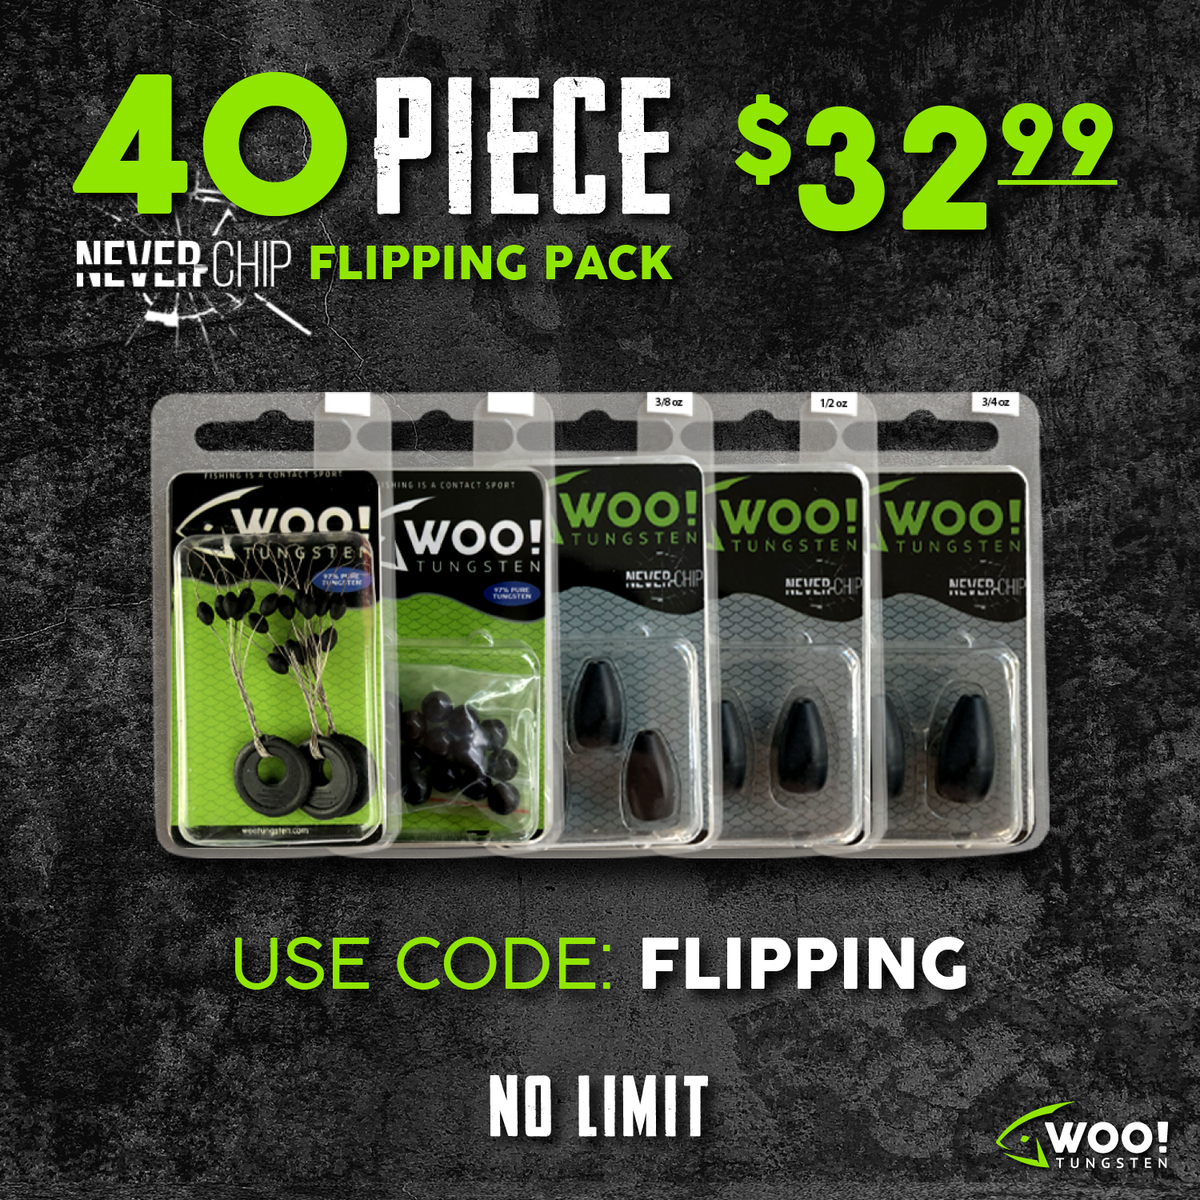 FLIPPING PACK - 40 Piece - Between 3/8 oz and 3/4 oz - USE CODE